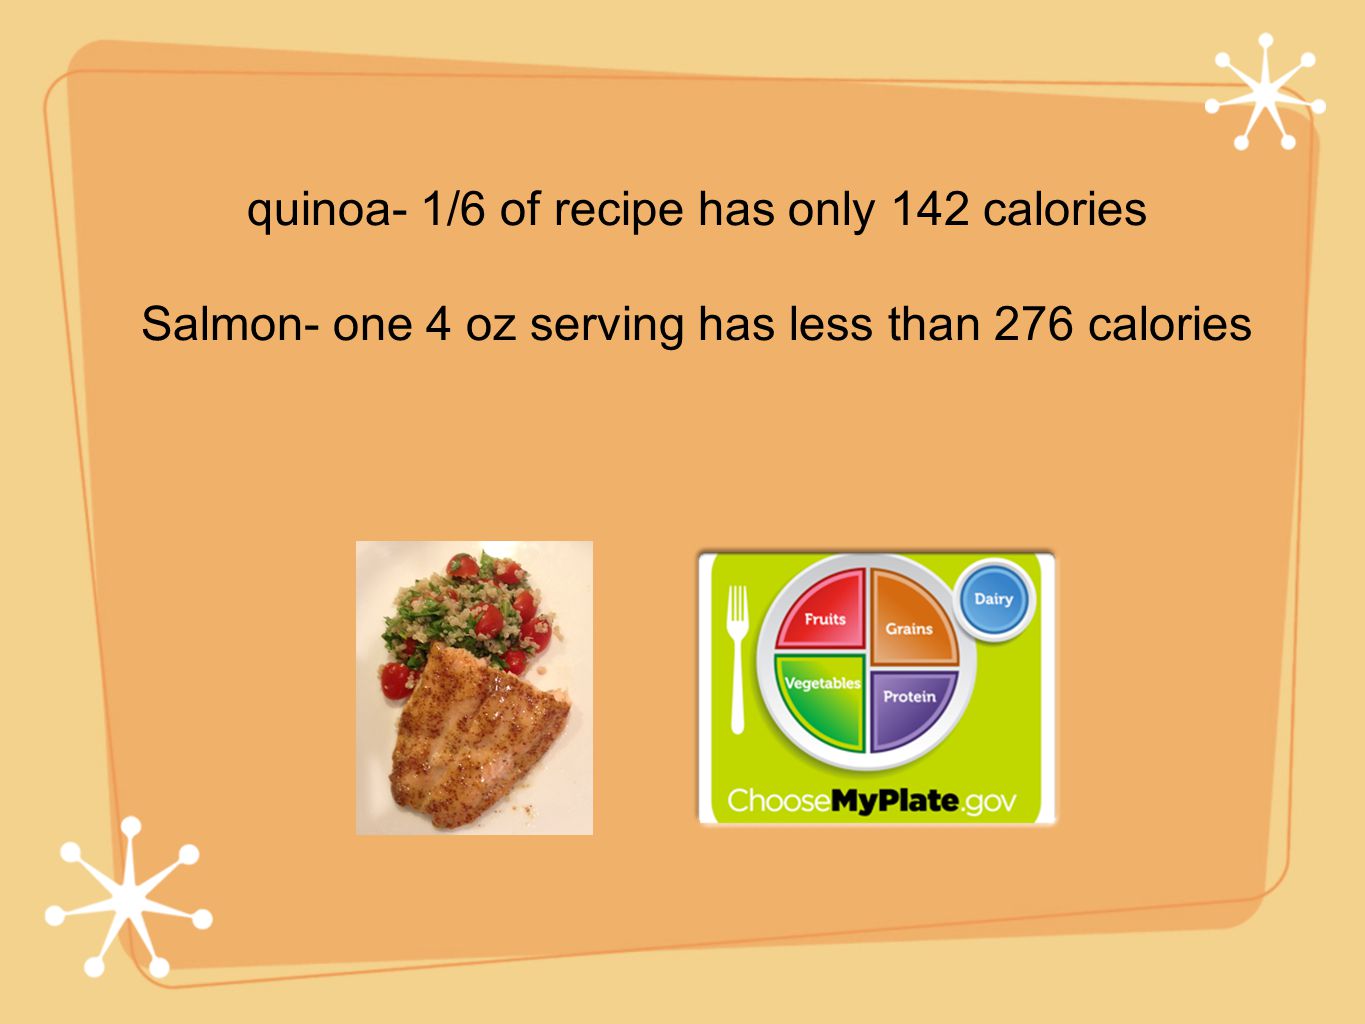 quinoa- 1/6 of recipe has only 142 calories Salmon- one 4 oz serving has less than 276 calories